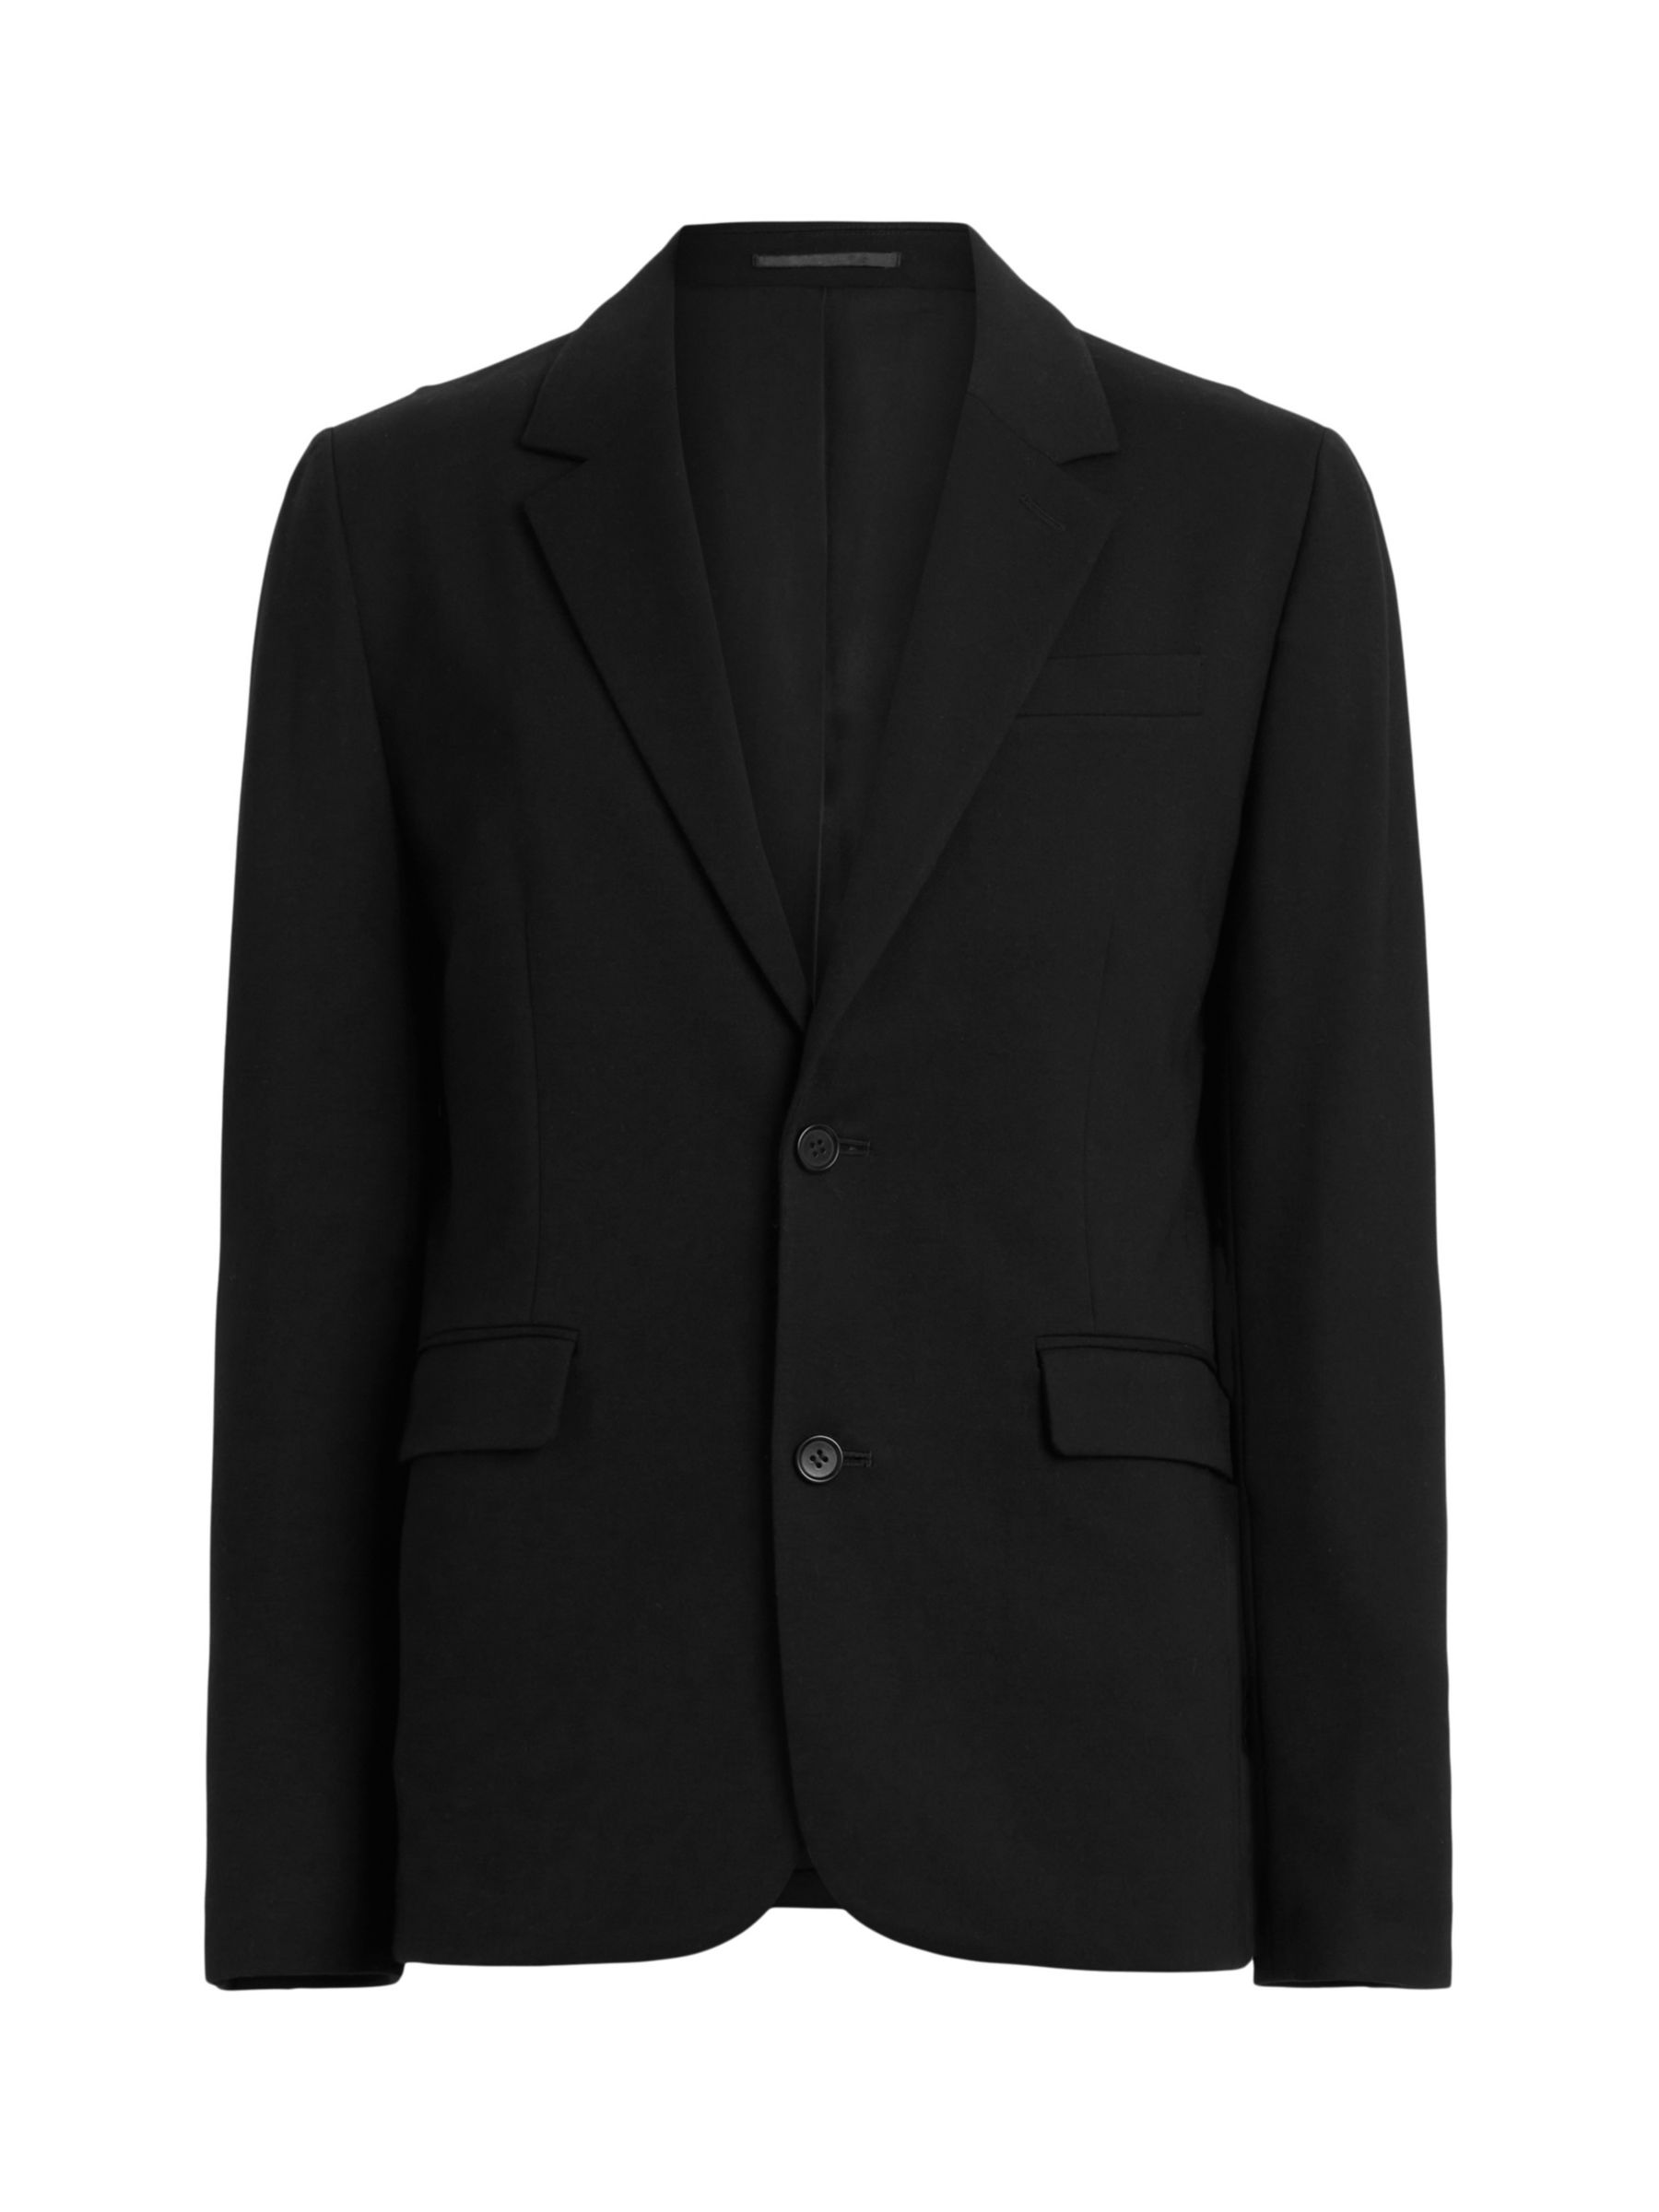 AllSaints Helm Tailored Blazer, Charcoal at John Lewis & Partners